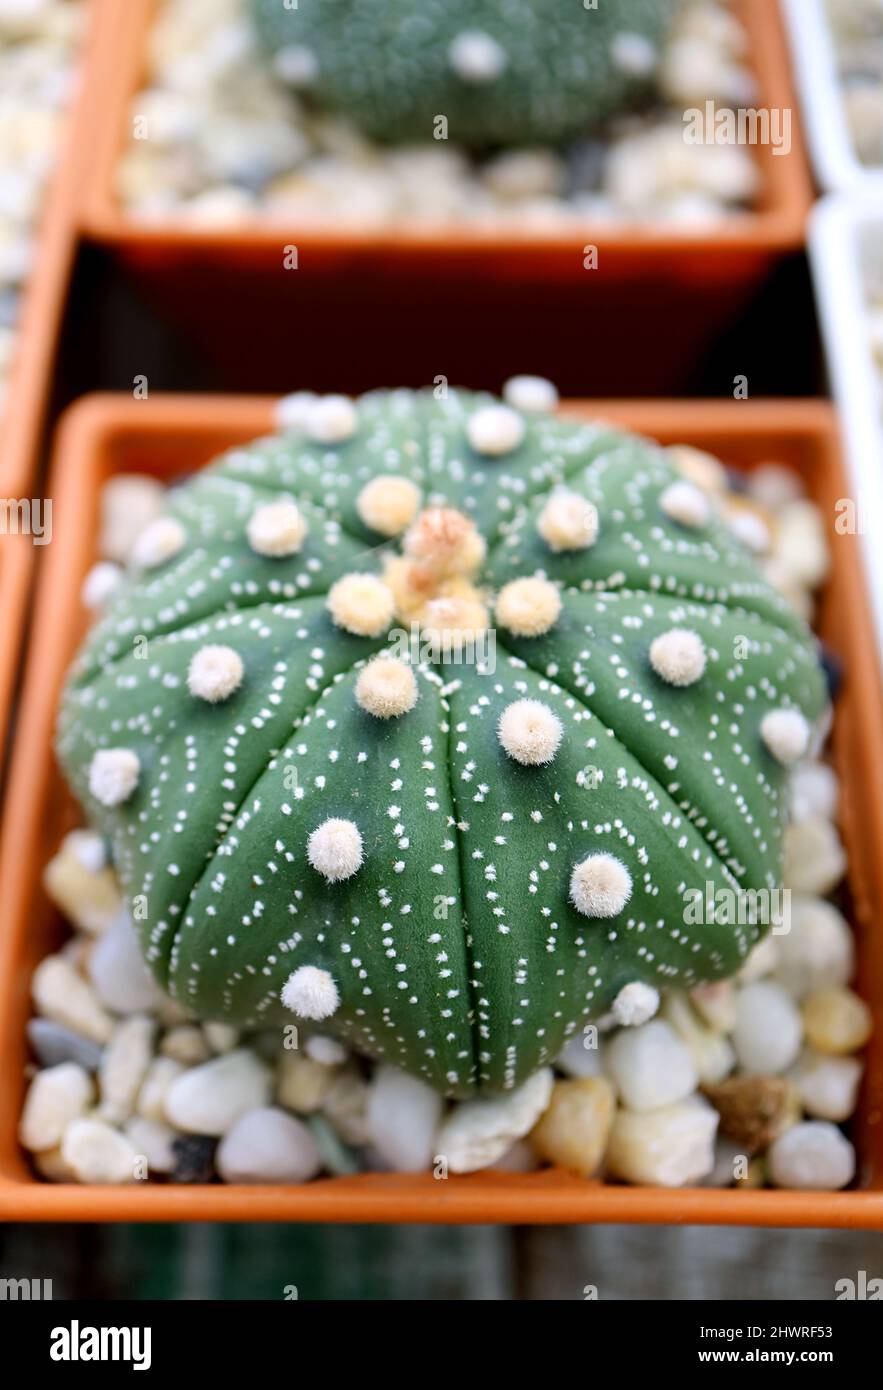 Closeup of Amazing Potted Astrophytum Asterias or Sand Dollar Cactus Plant Stock Photo